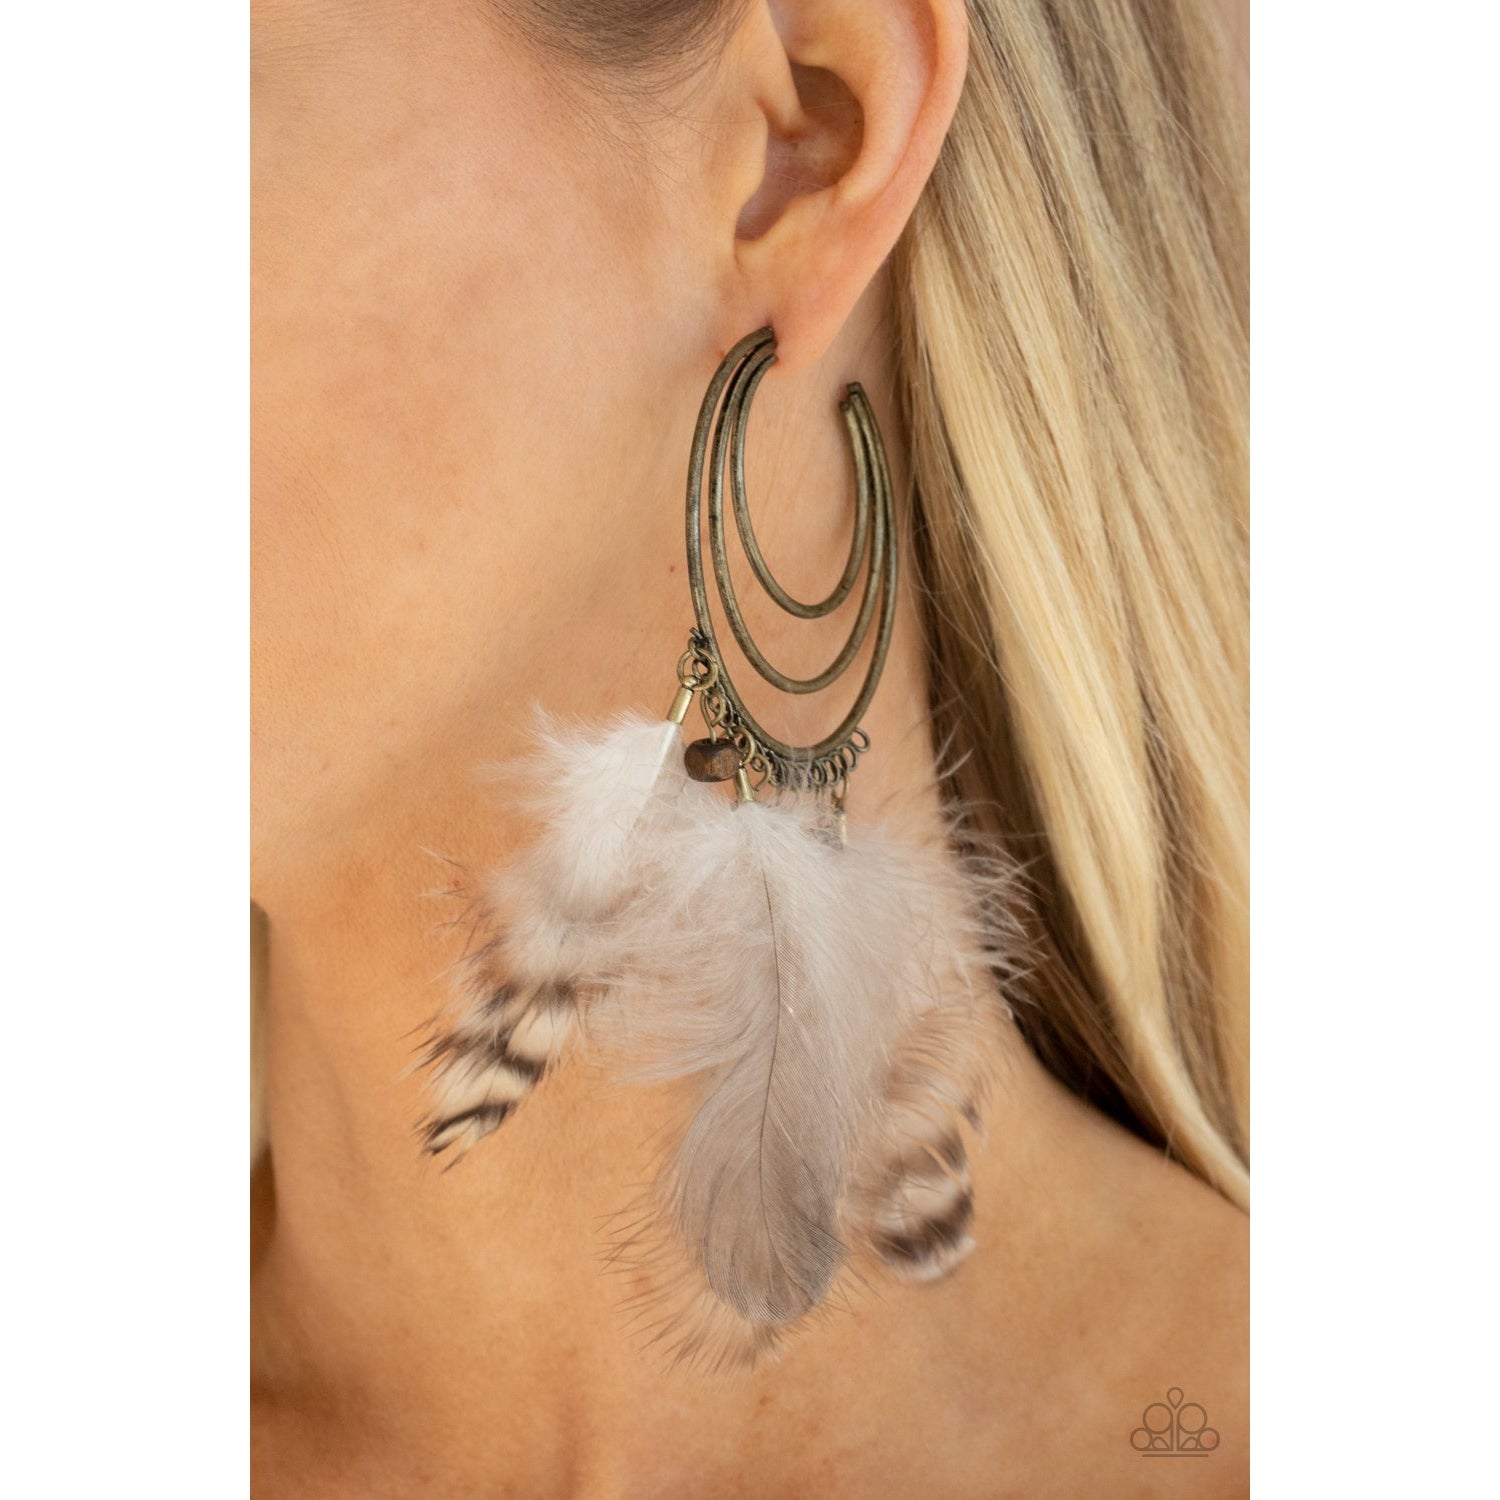 Freely Free Bird - Brass and Feathers Earrings - Paparazzi Accessories - GlaMarous Titi Jewels